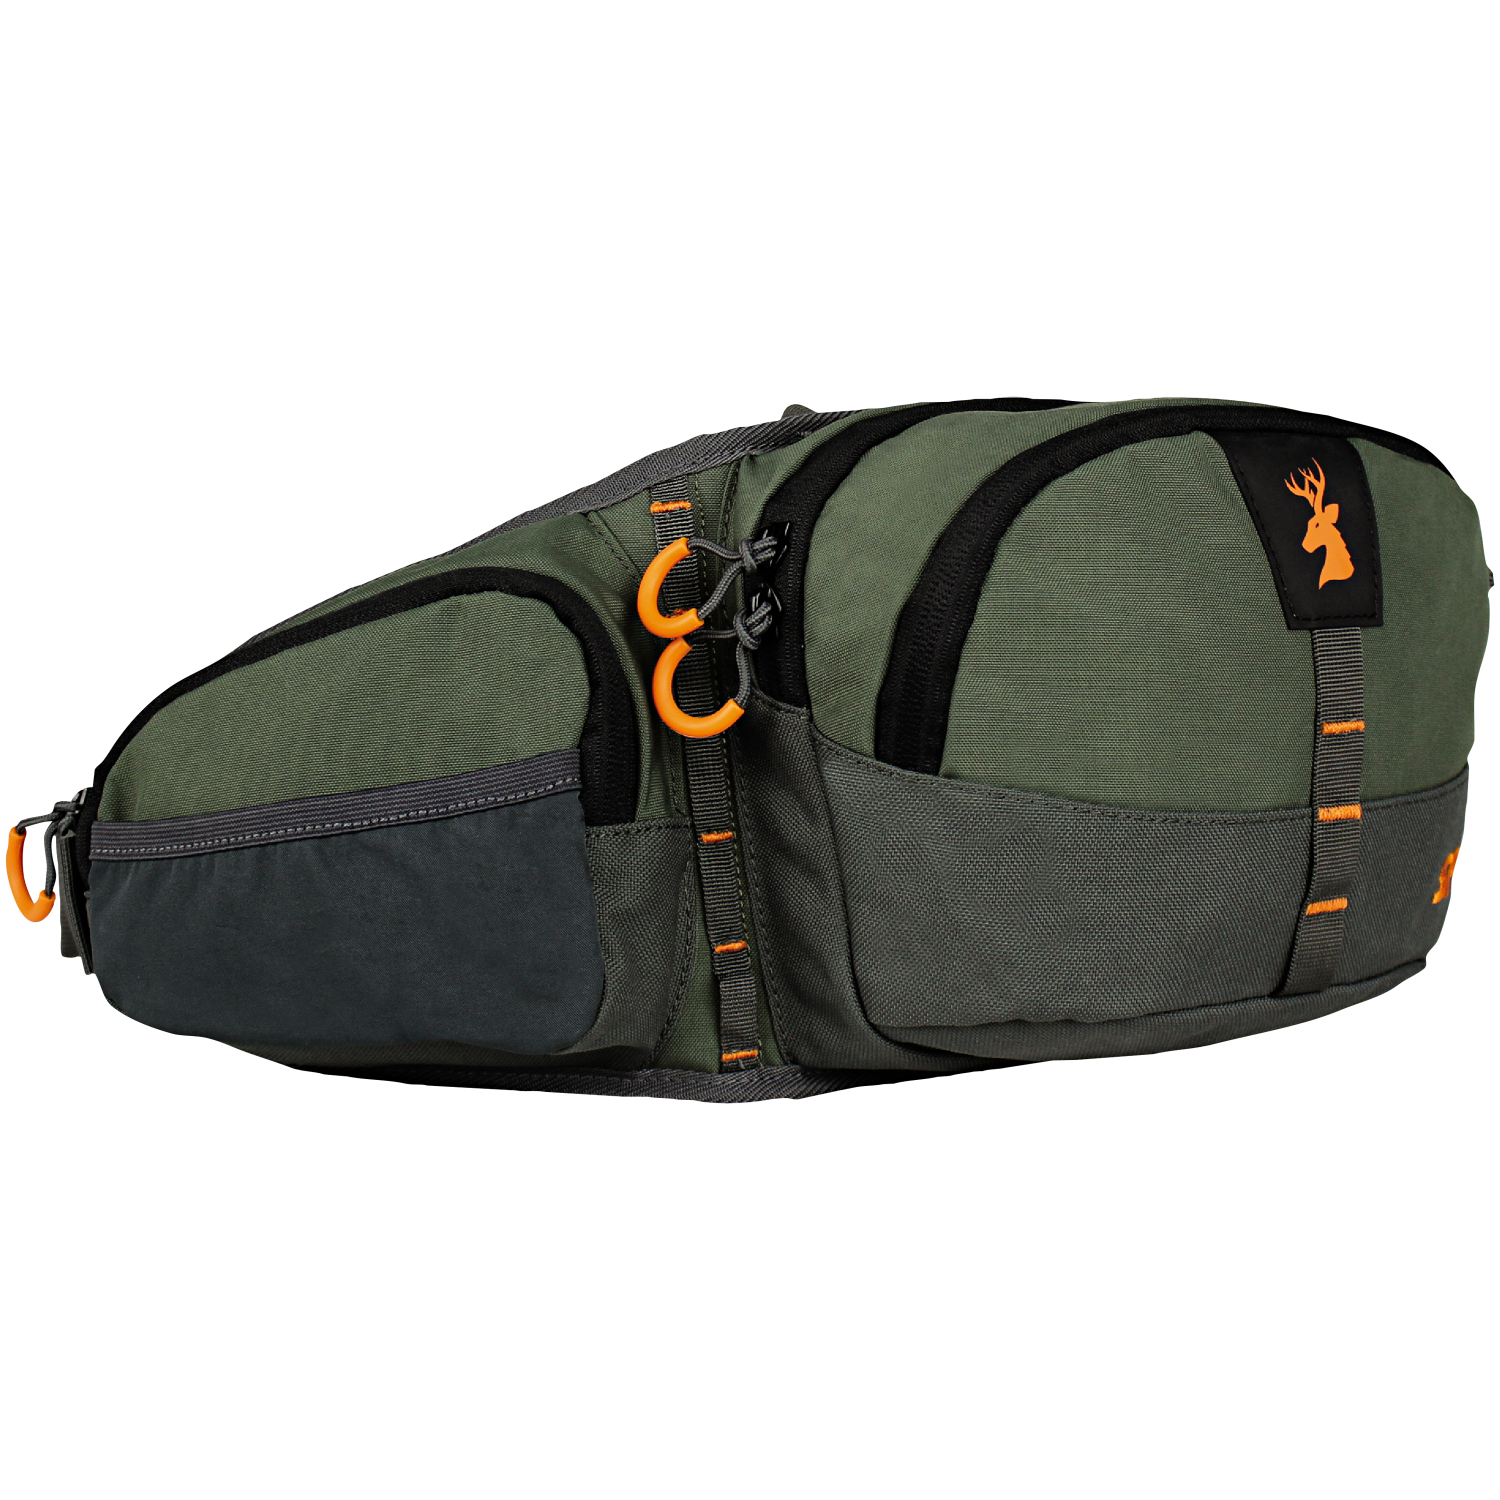 Spika Drover fanny pack at low prices